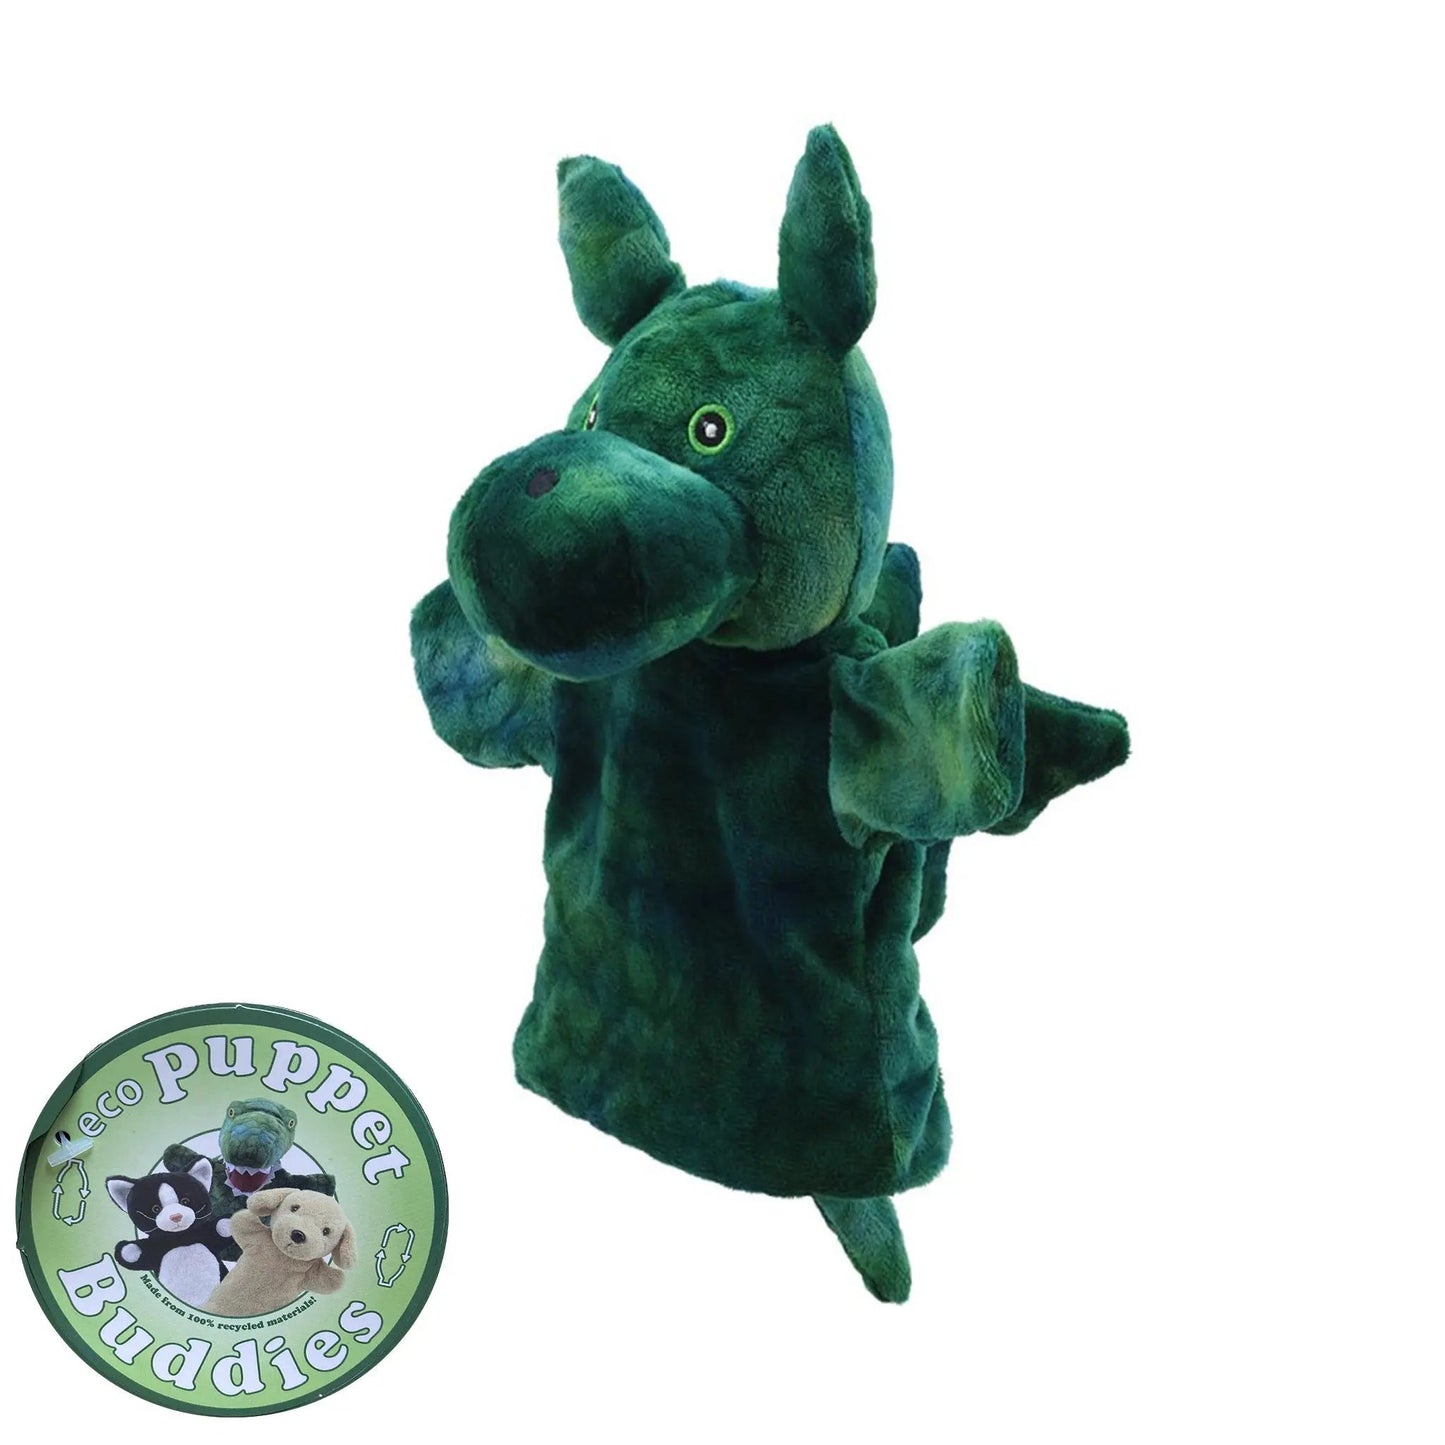 Dragon (Green) Eco Puppet Buddies Hand Puppet - The Puppet Company - The Forgotten Toy Shop